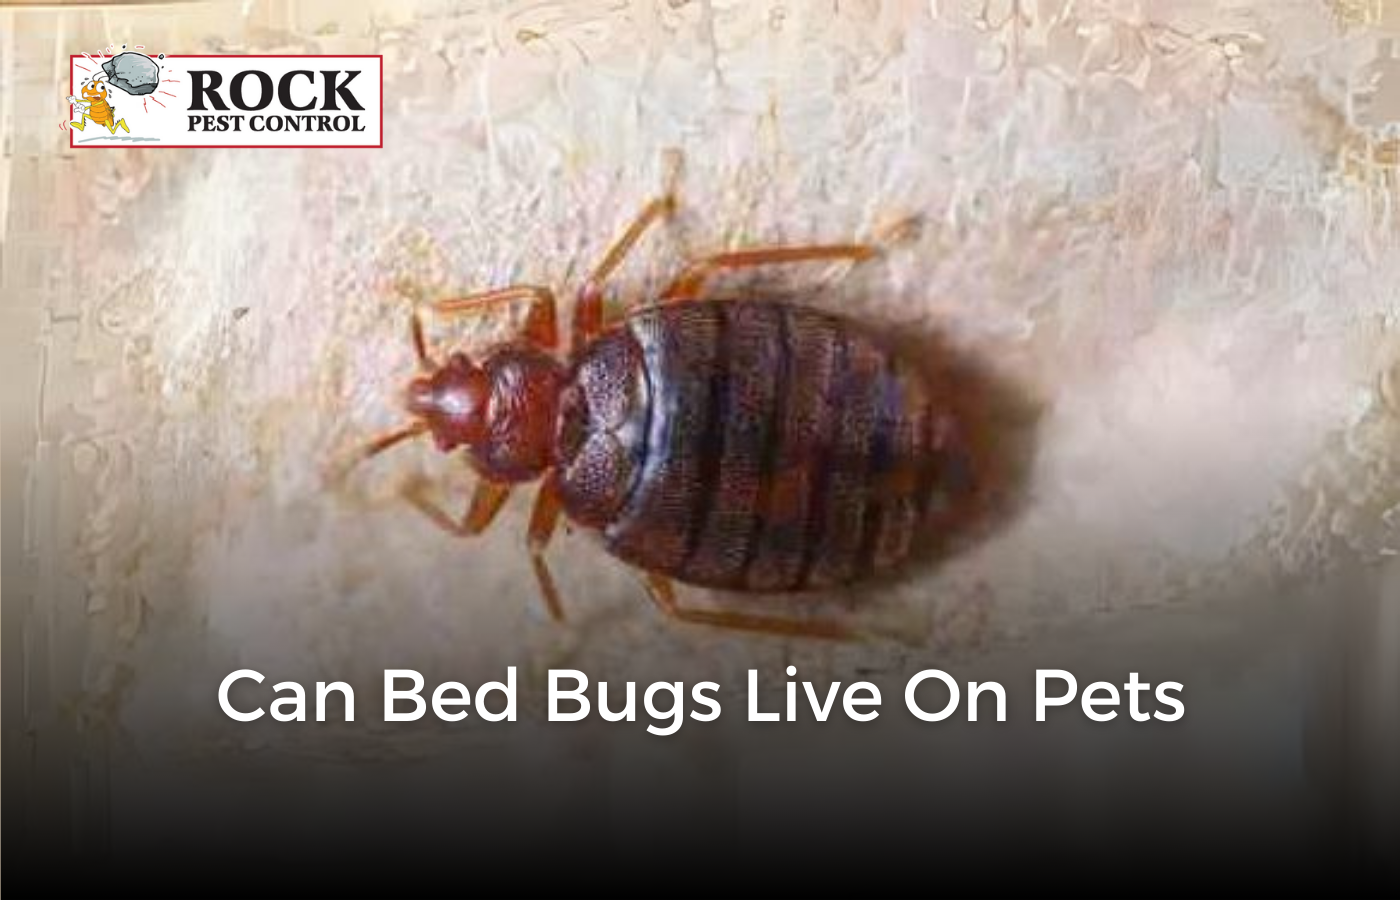 Can Bed Bugs Live on Pets